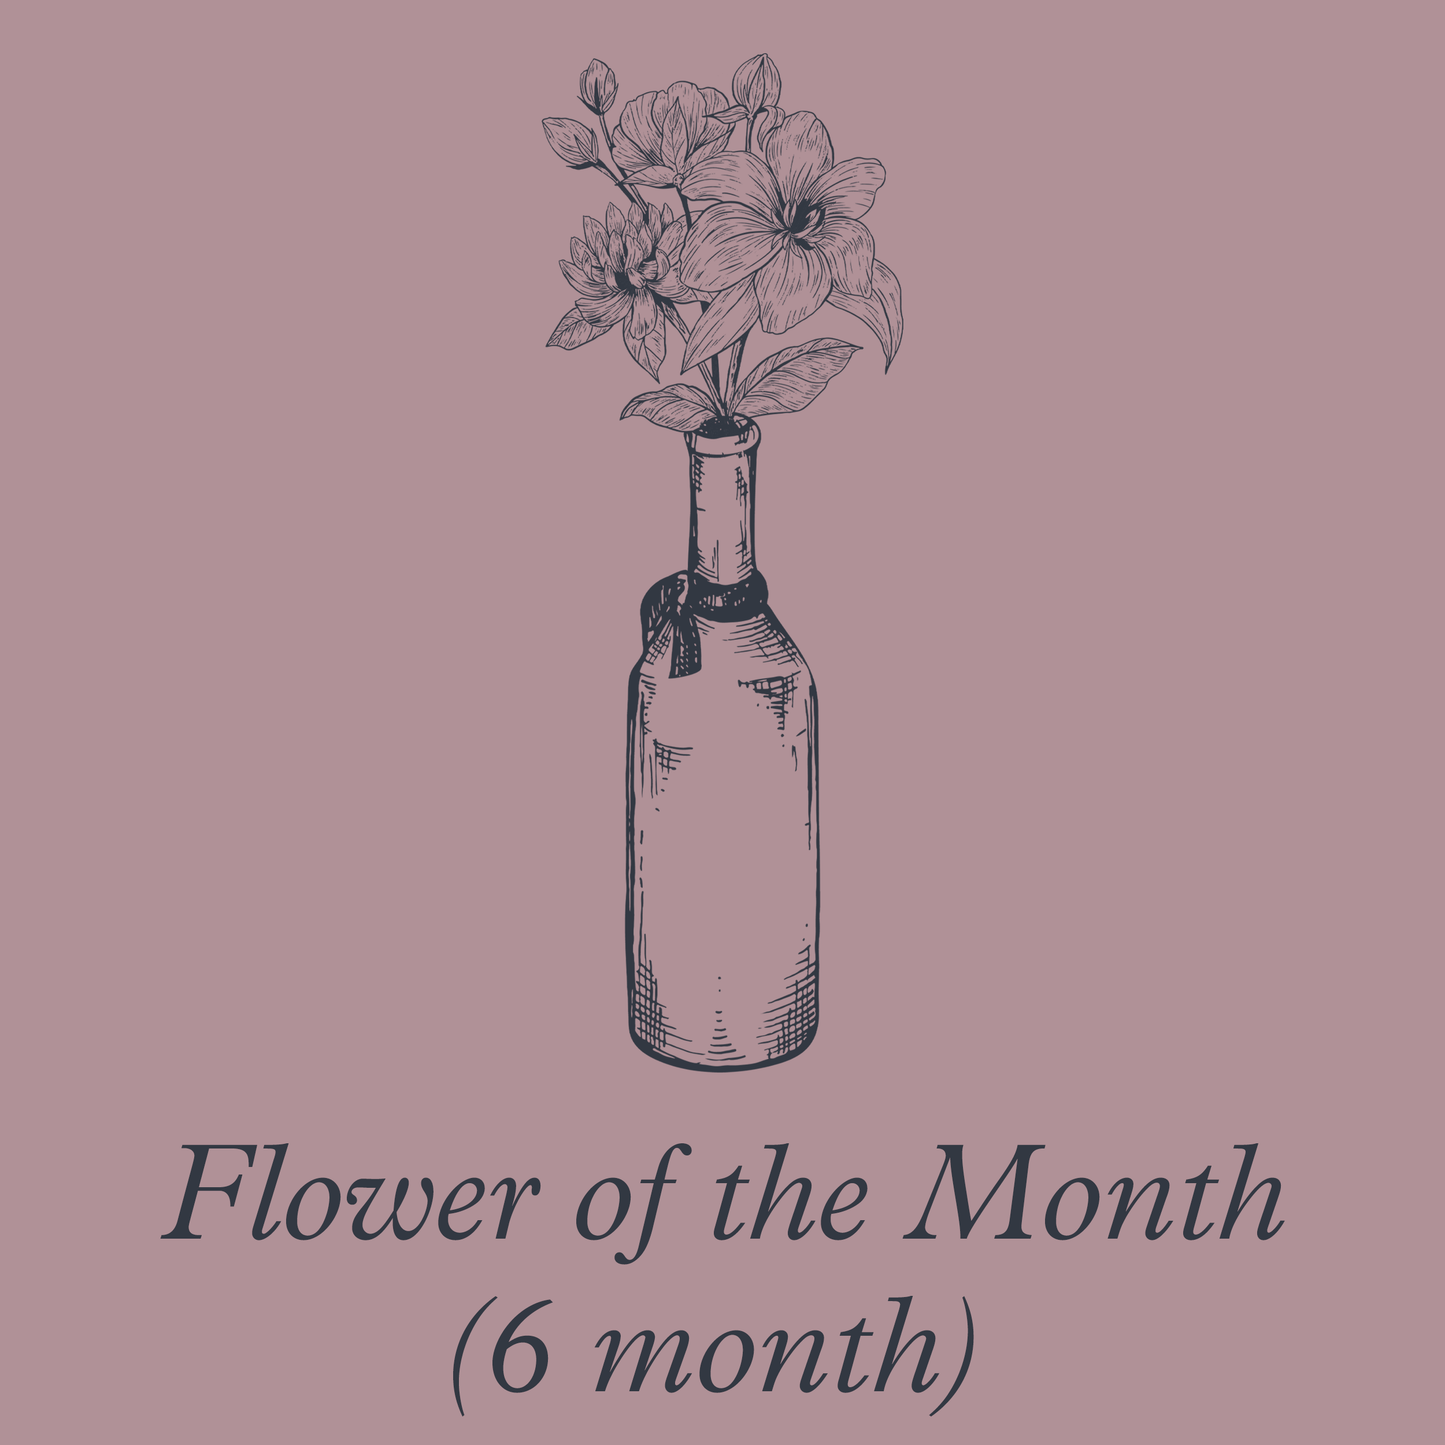 Flower of the Month (6 month)